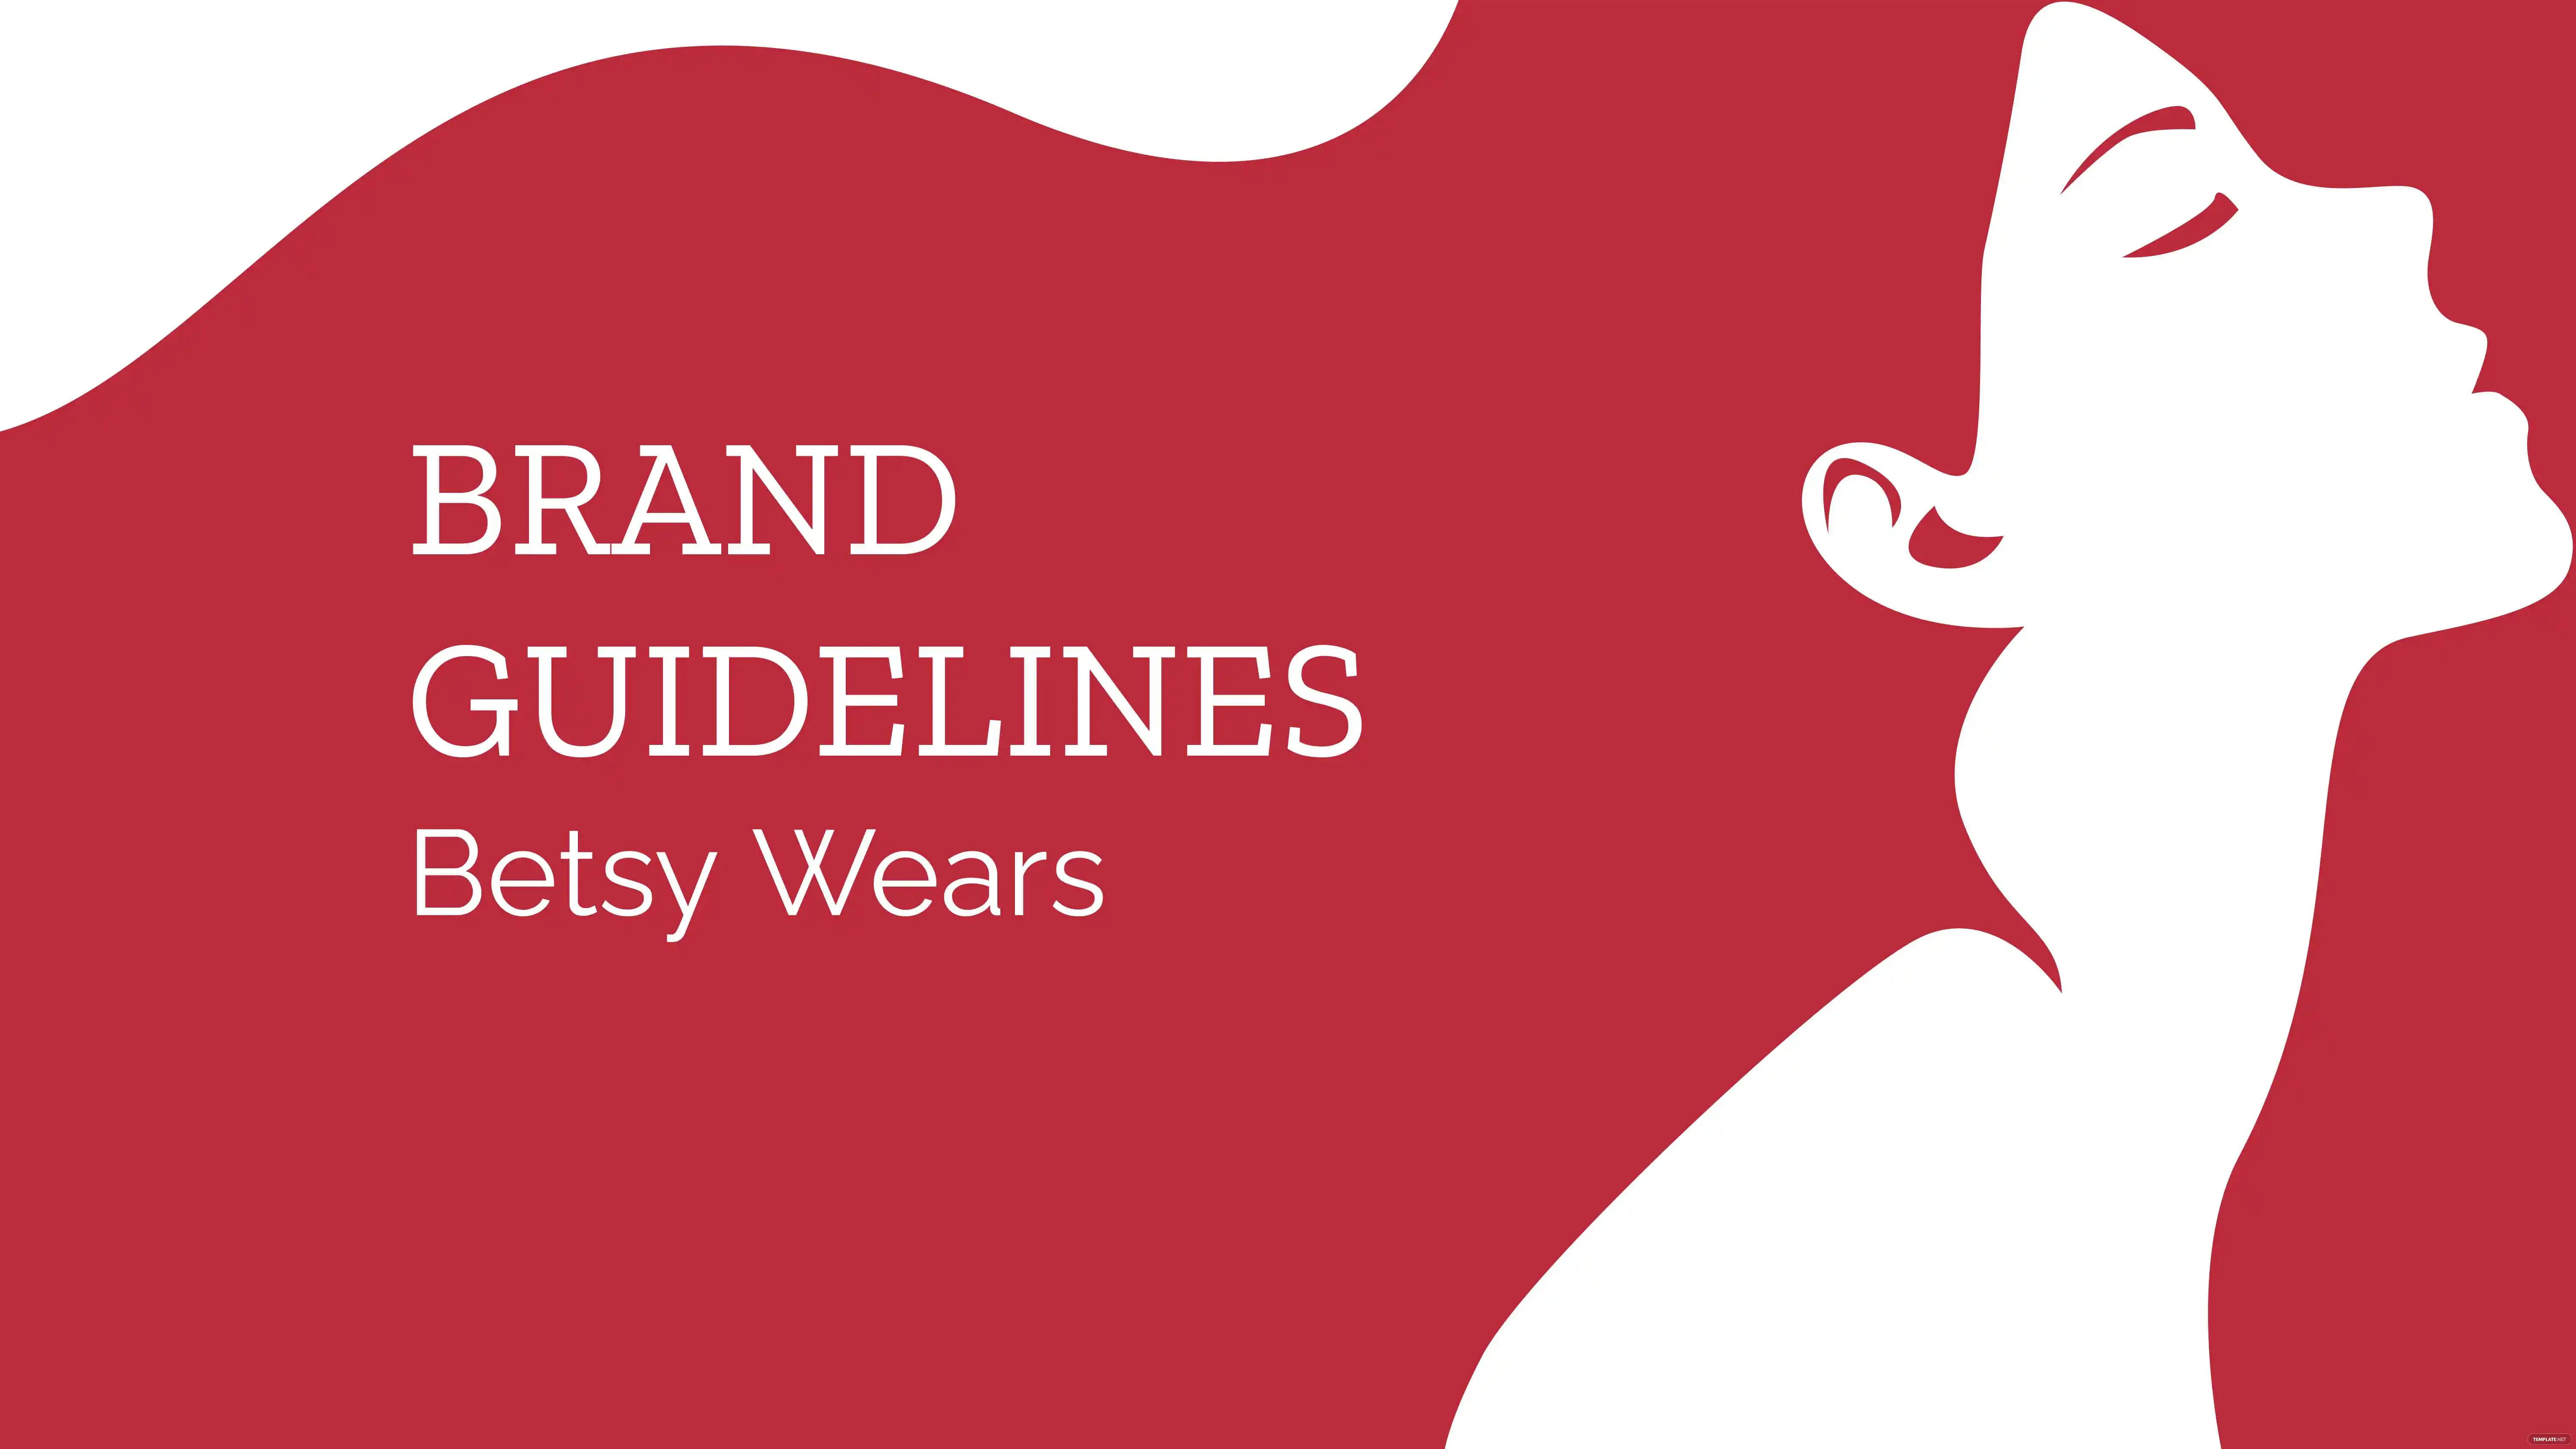 fashion brand guidelines ideas and examples